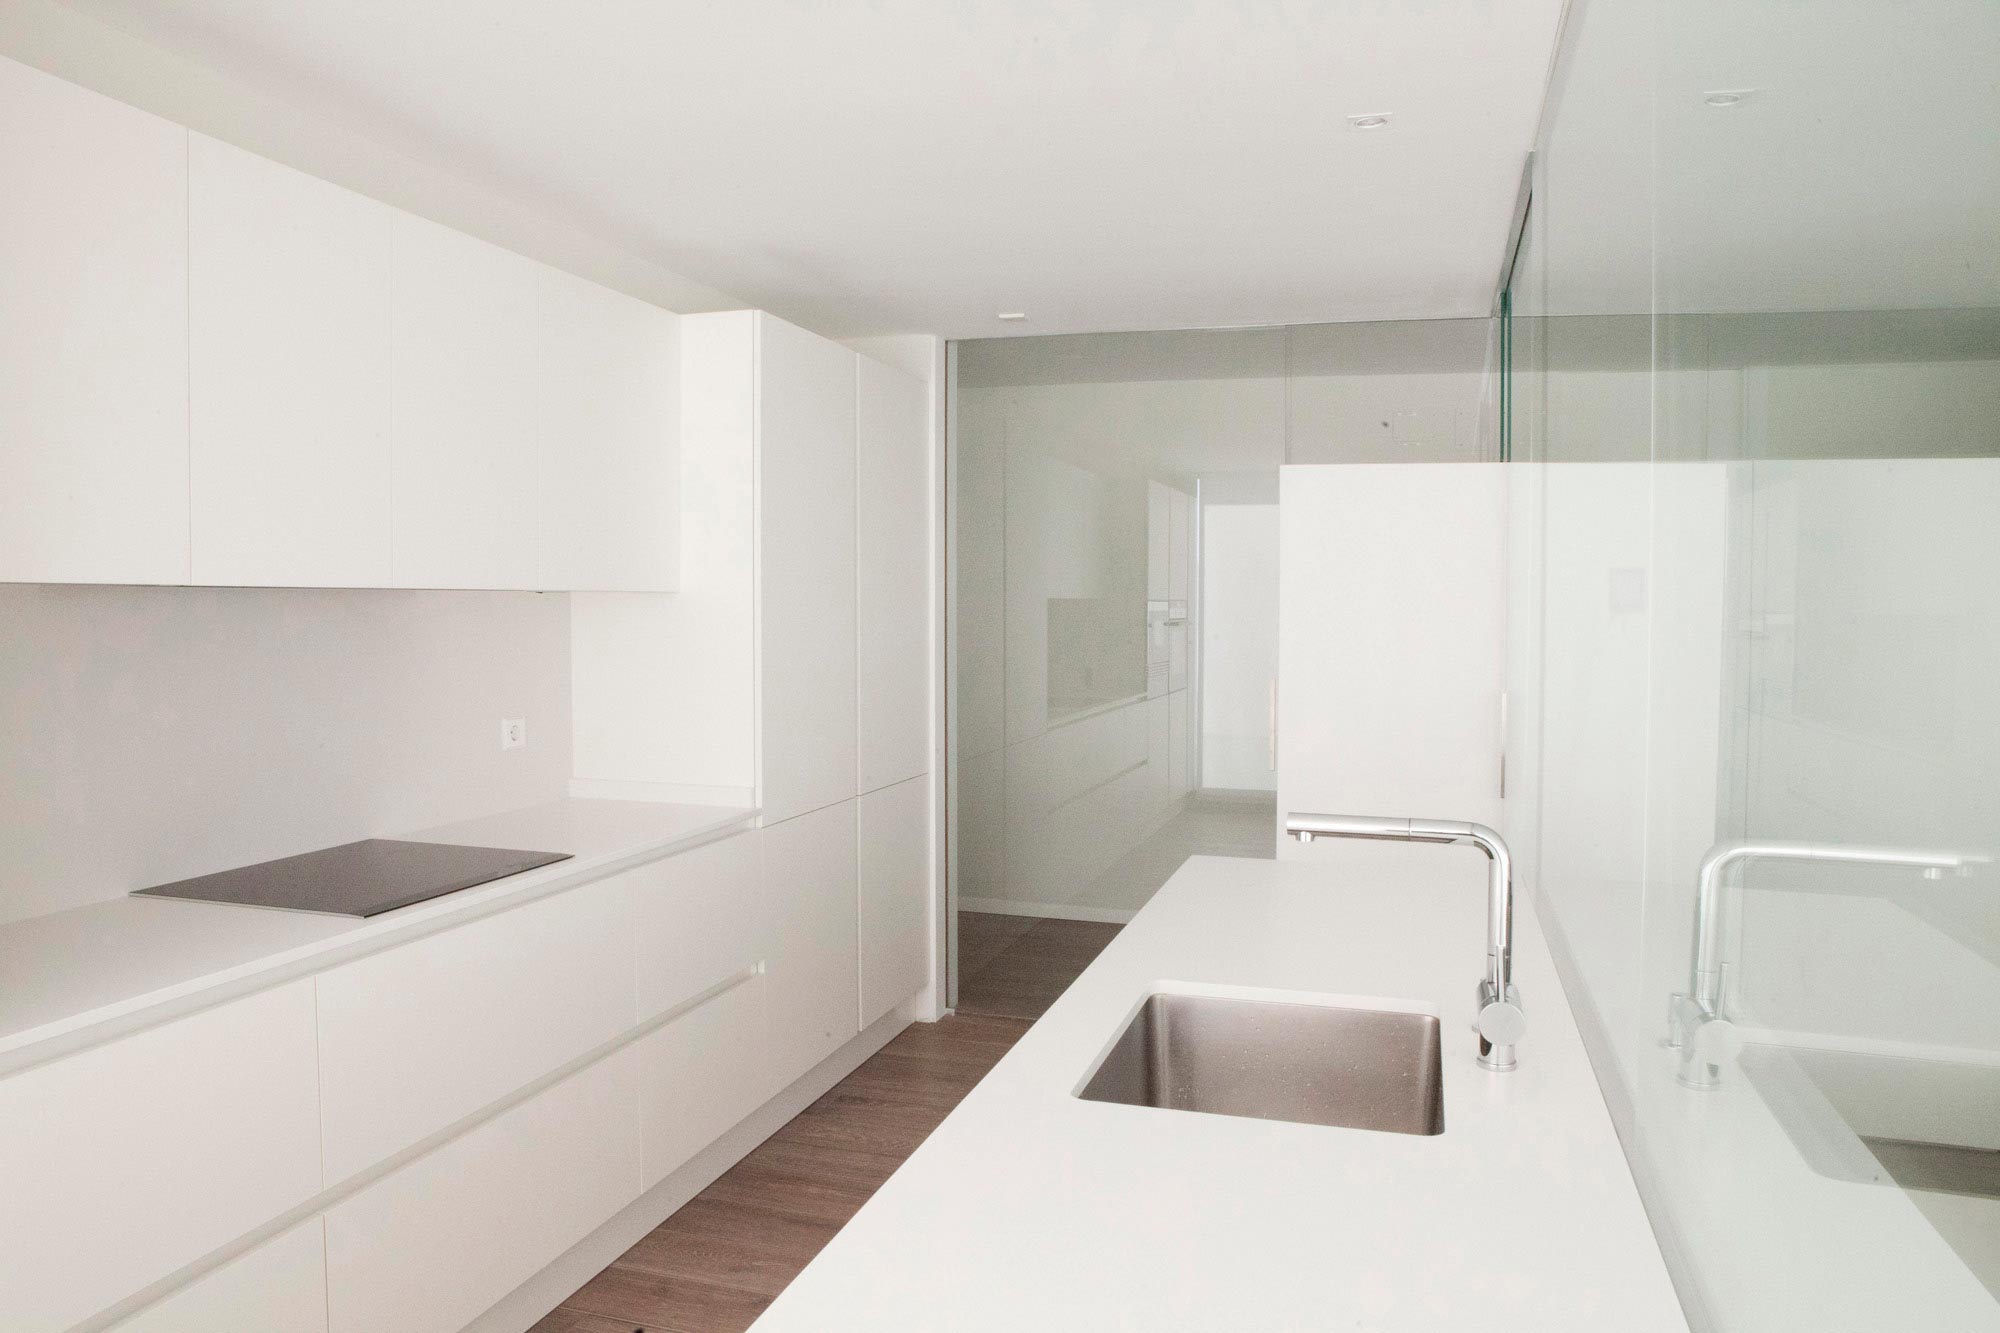 Luxury apartment refurbisment designed by Moah Architects in Santander